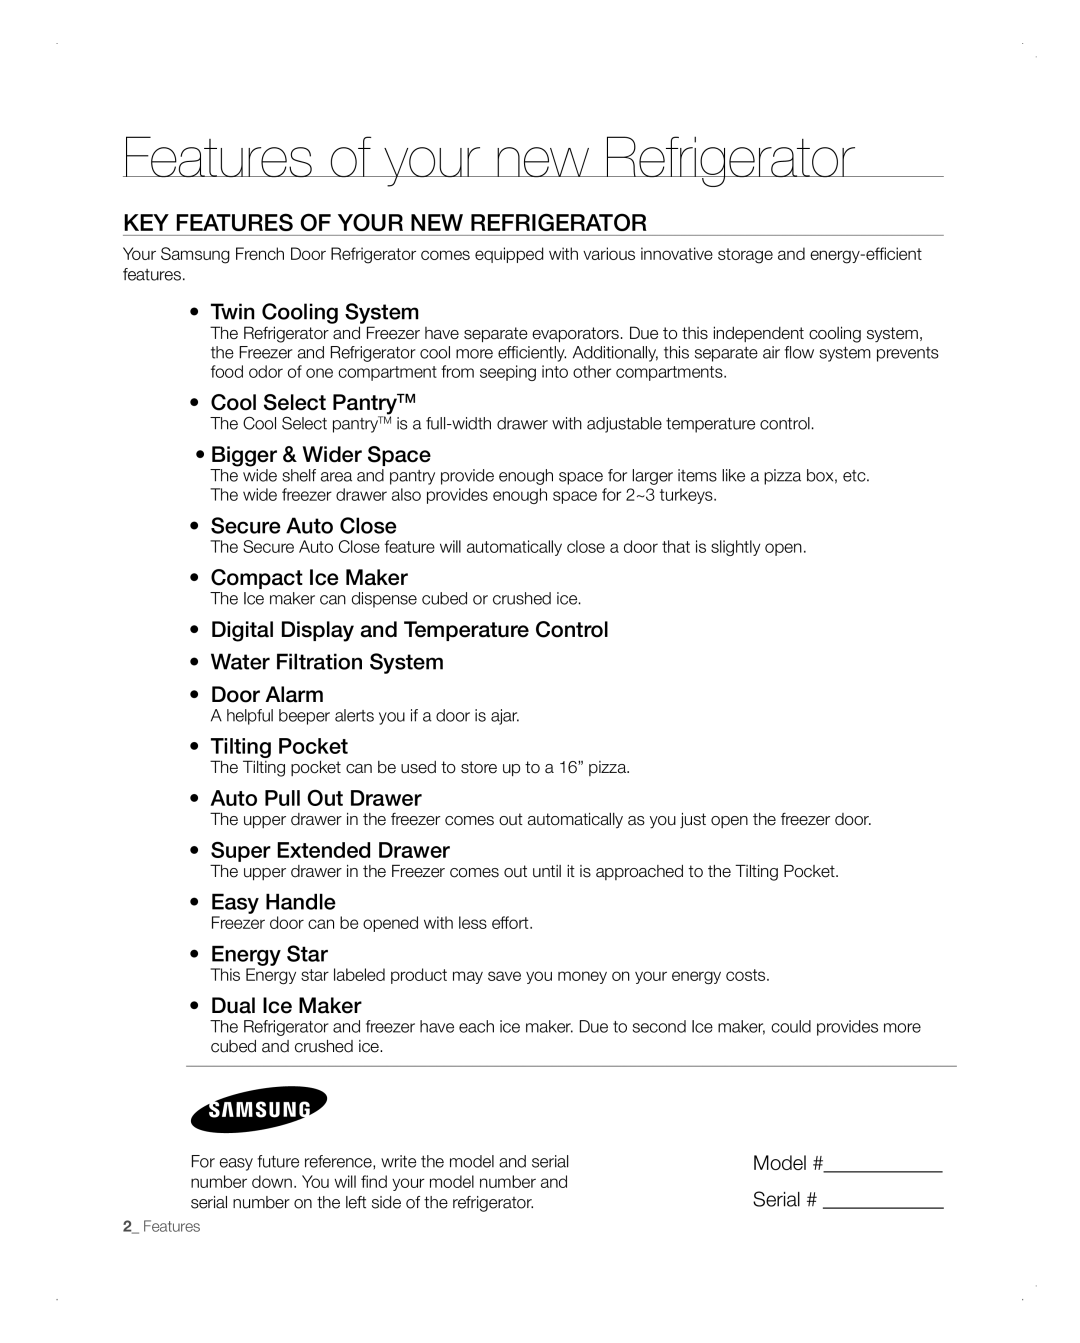 Samsung RFG298AARS user manual Features of your new Refrigerator, Key features of your new refrigerator 